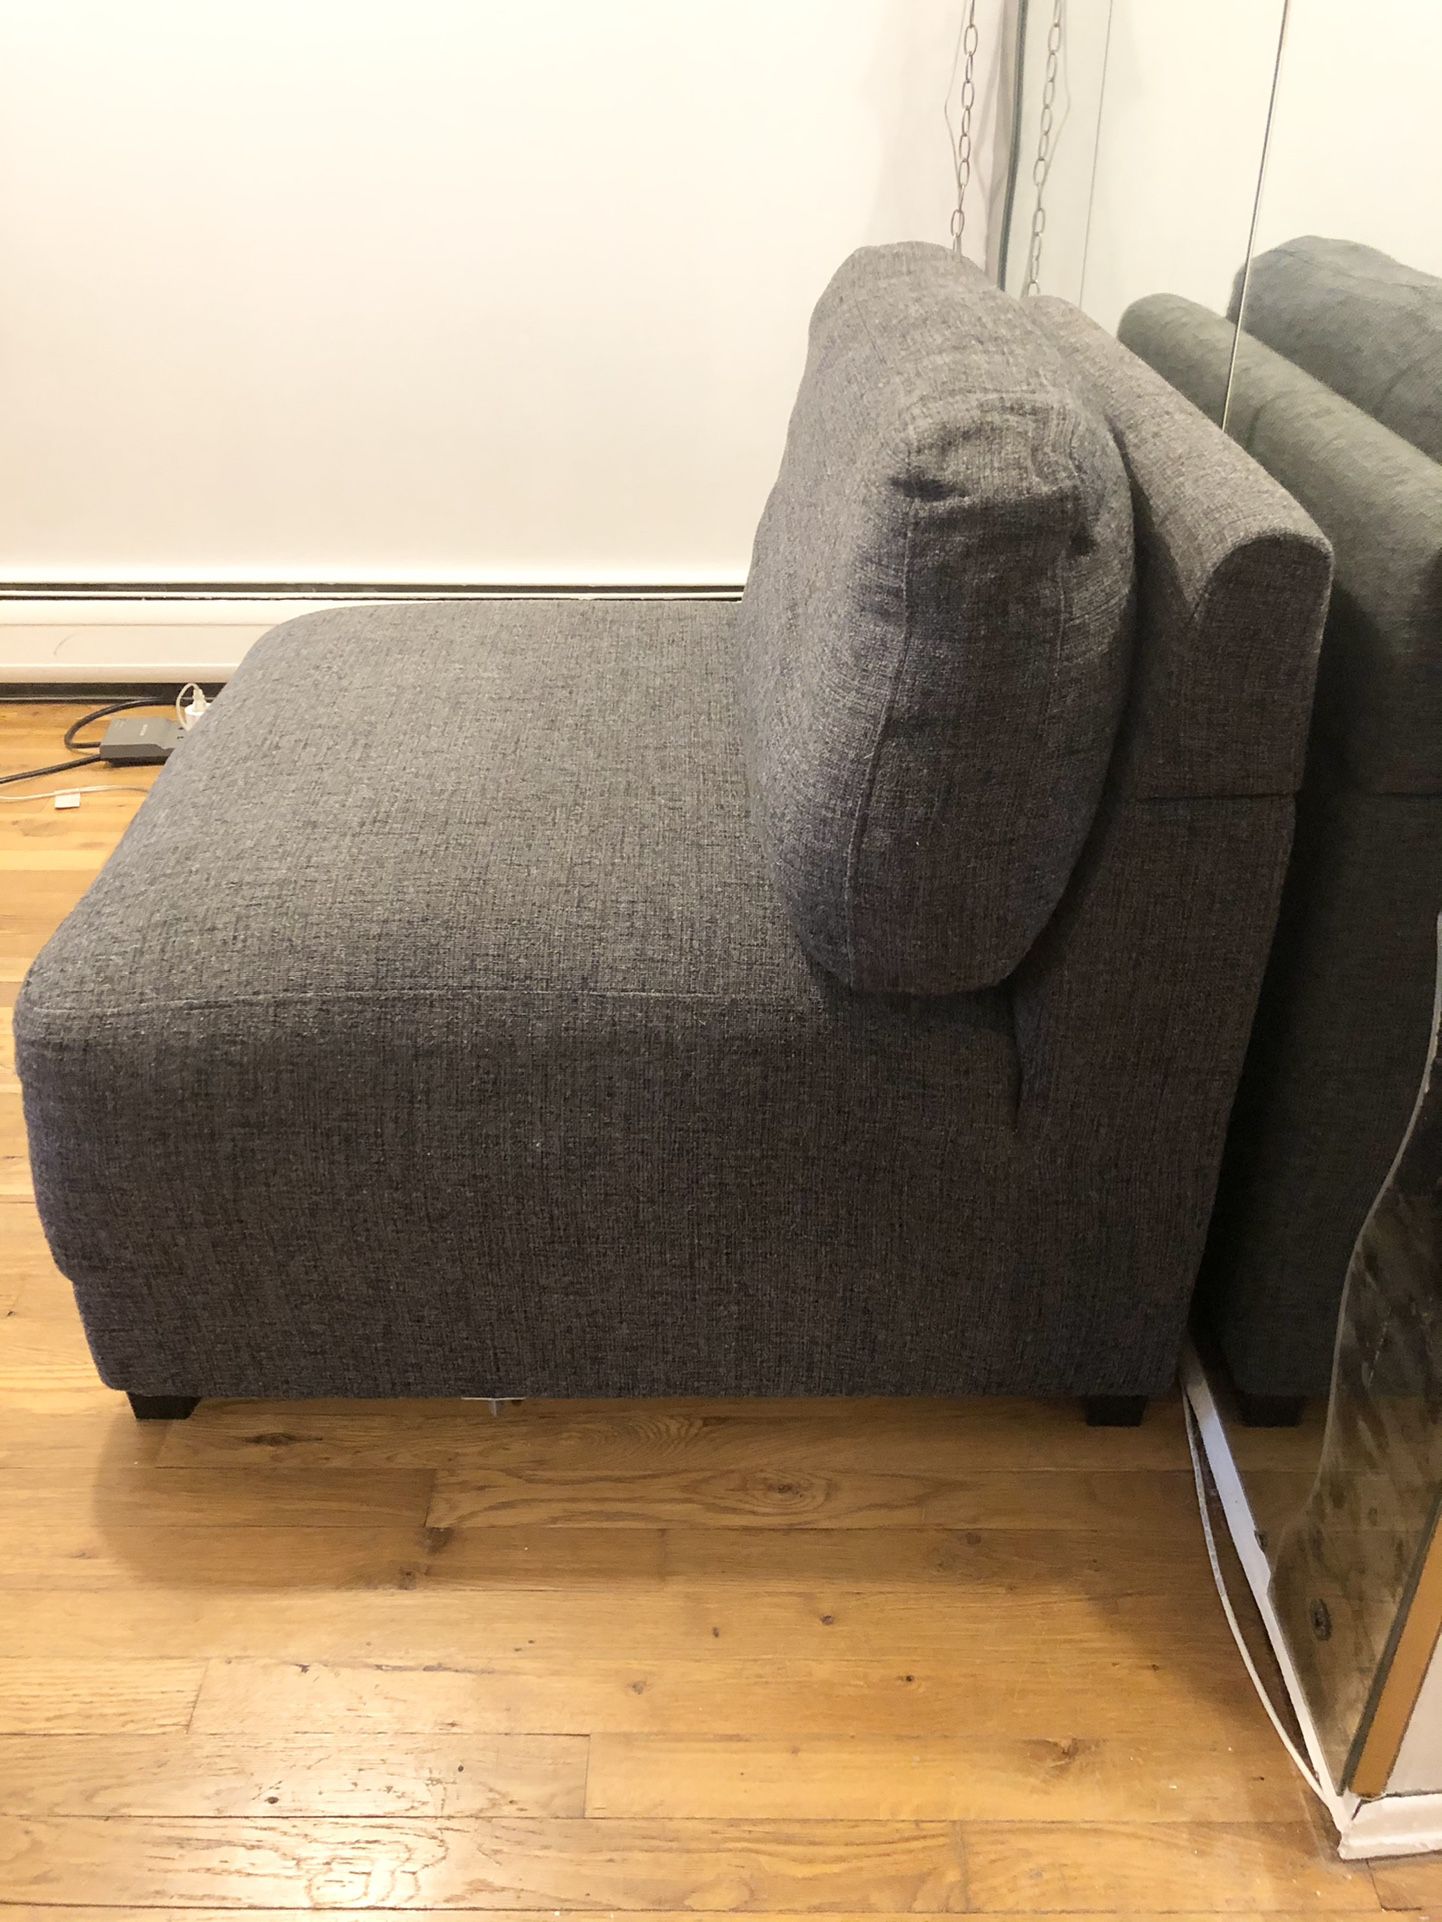 Sofa Chair From sectional